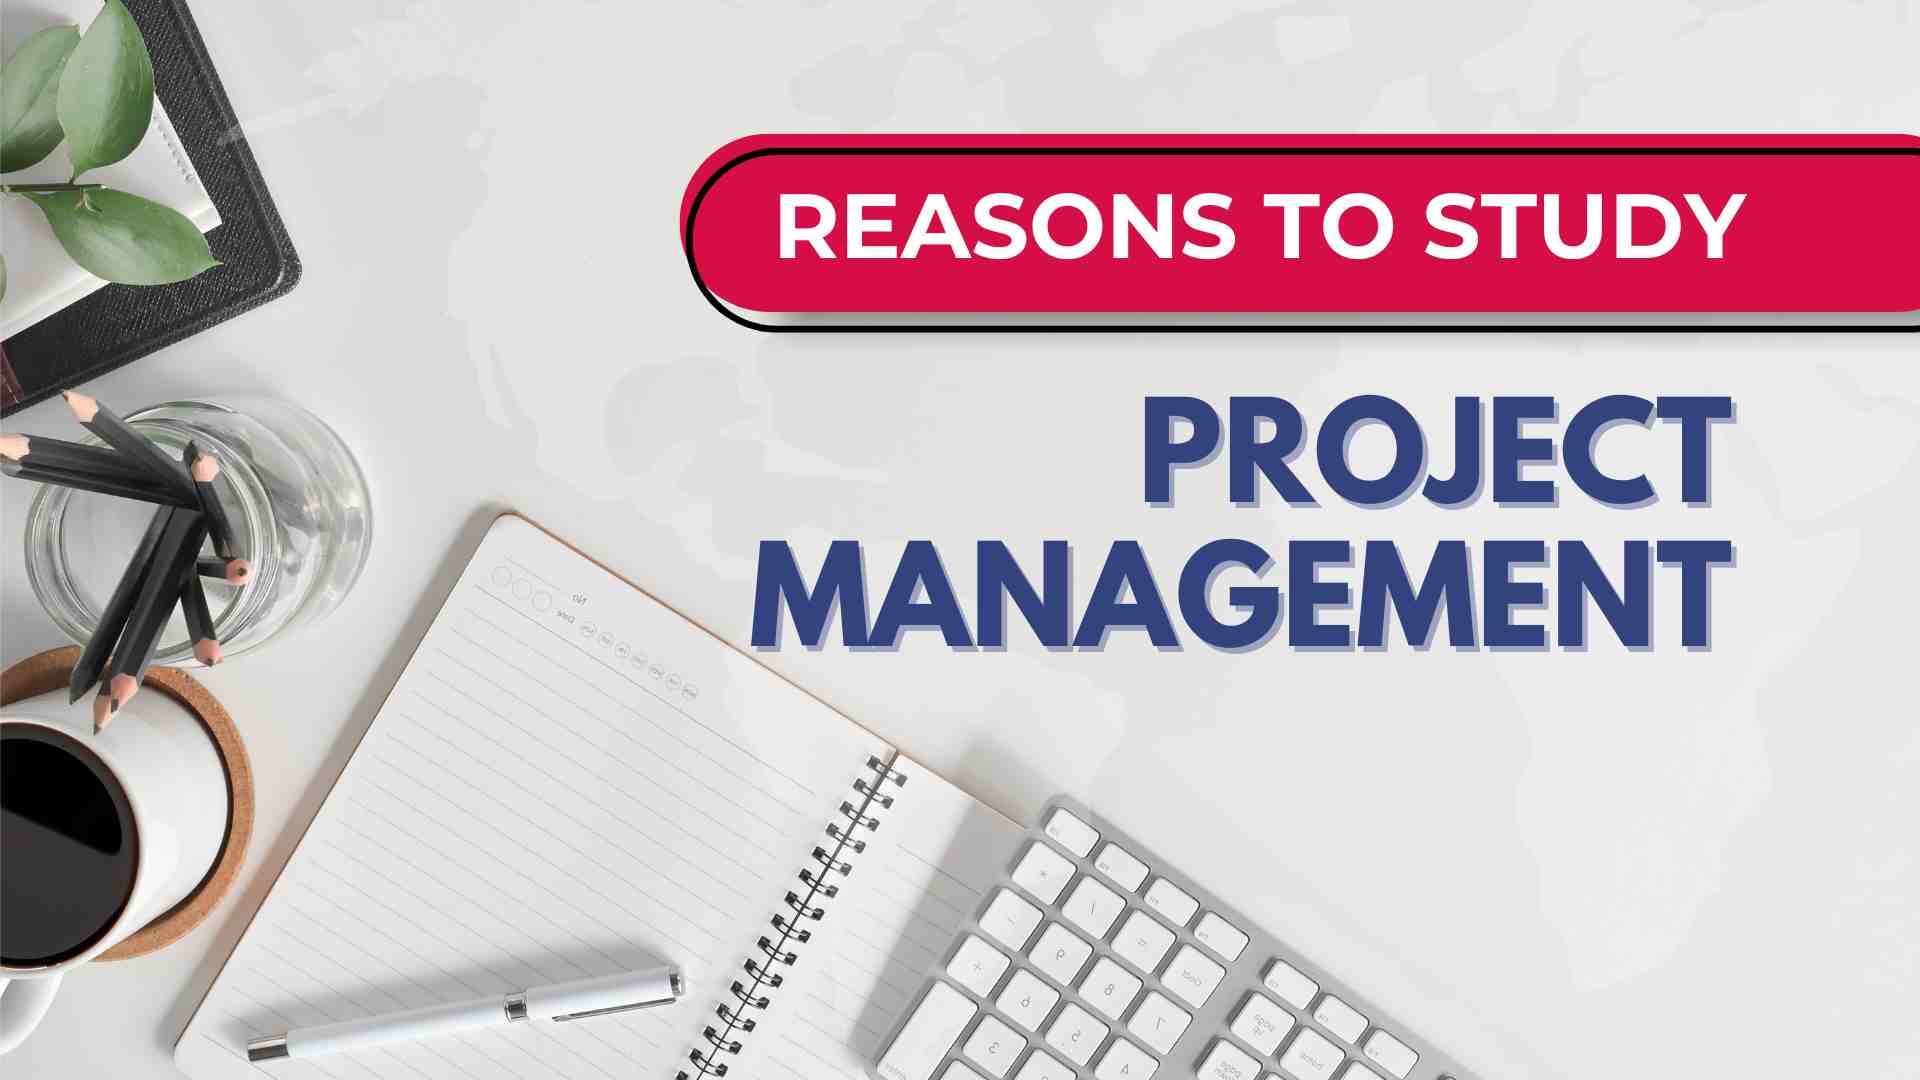 Reasons to study project management